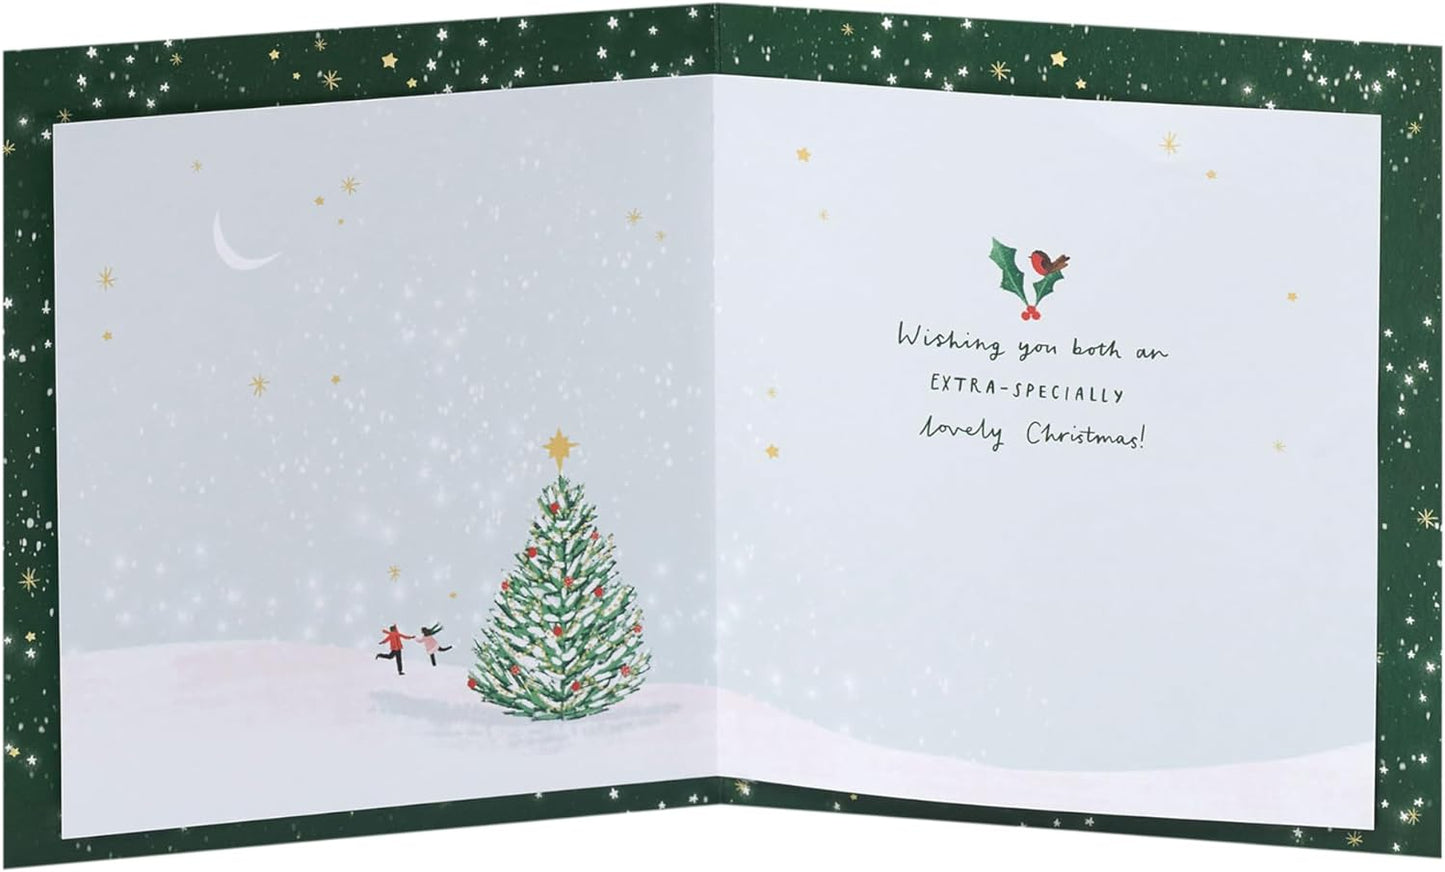 For Both of You Christmas Card City Ice Rink Design